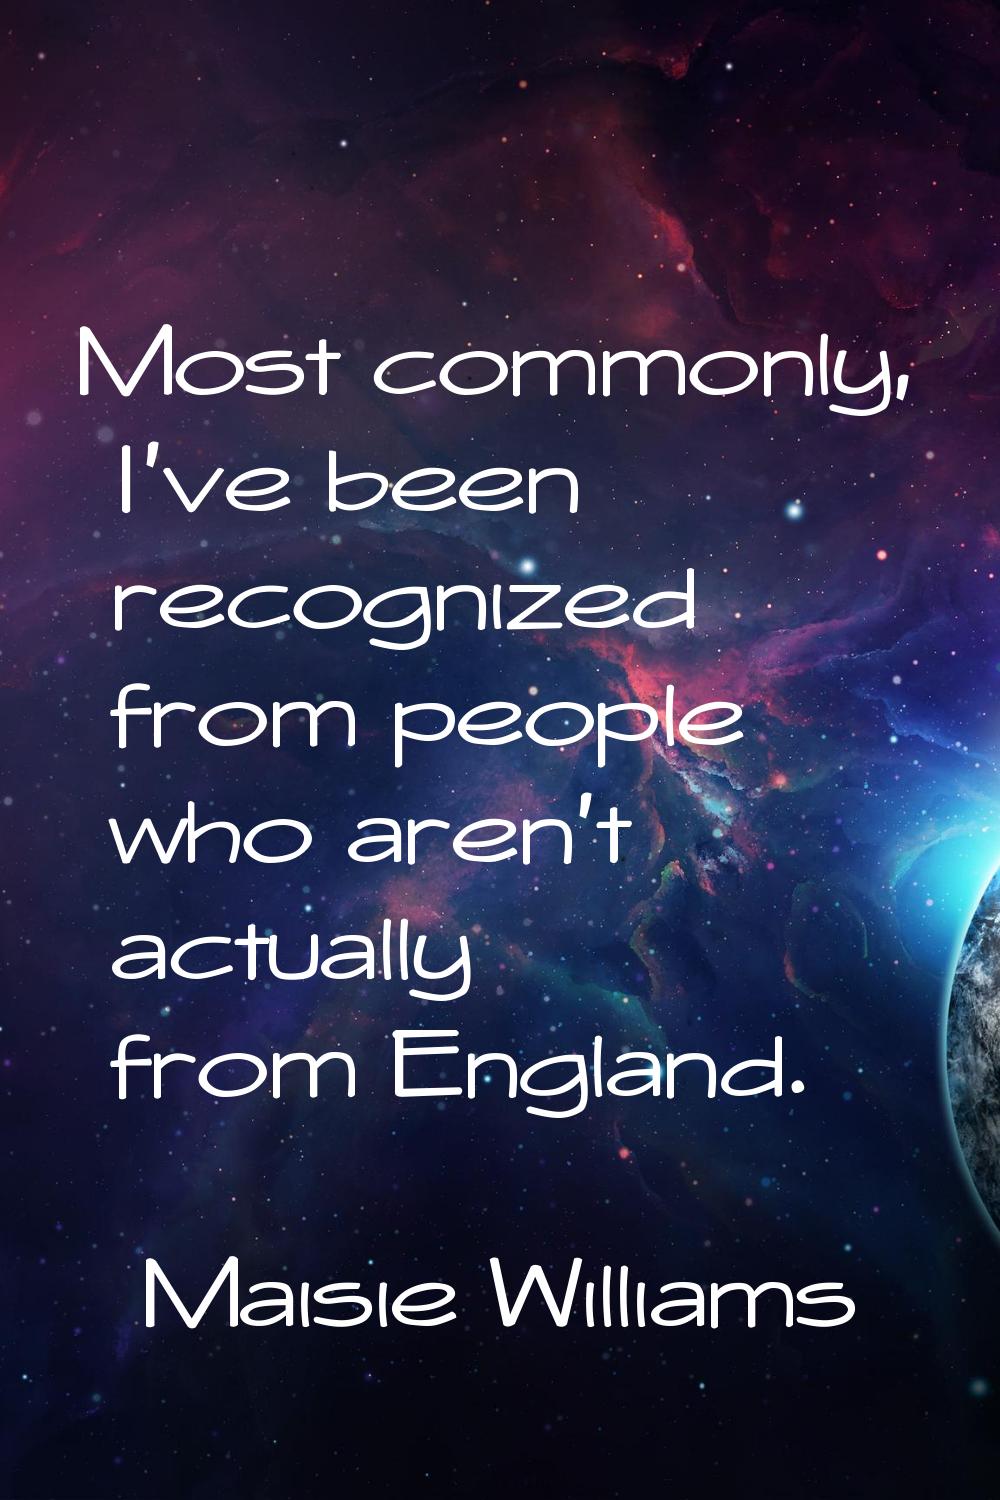 Most commonly, I've been recognized from people who aren't actually from England.